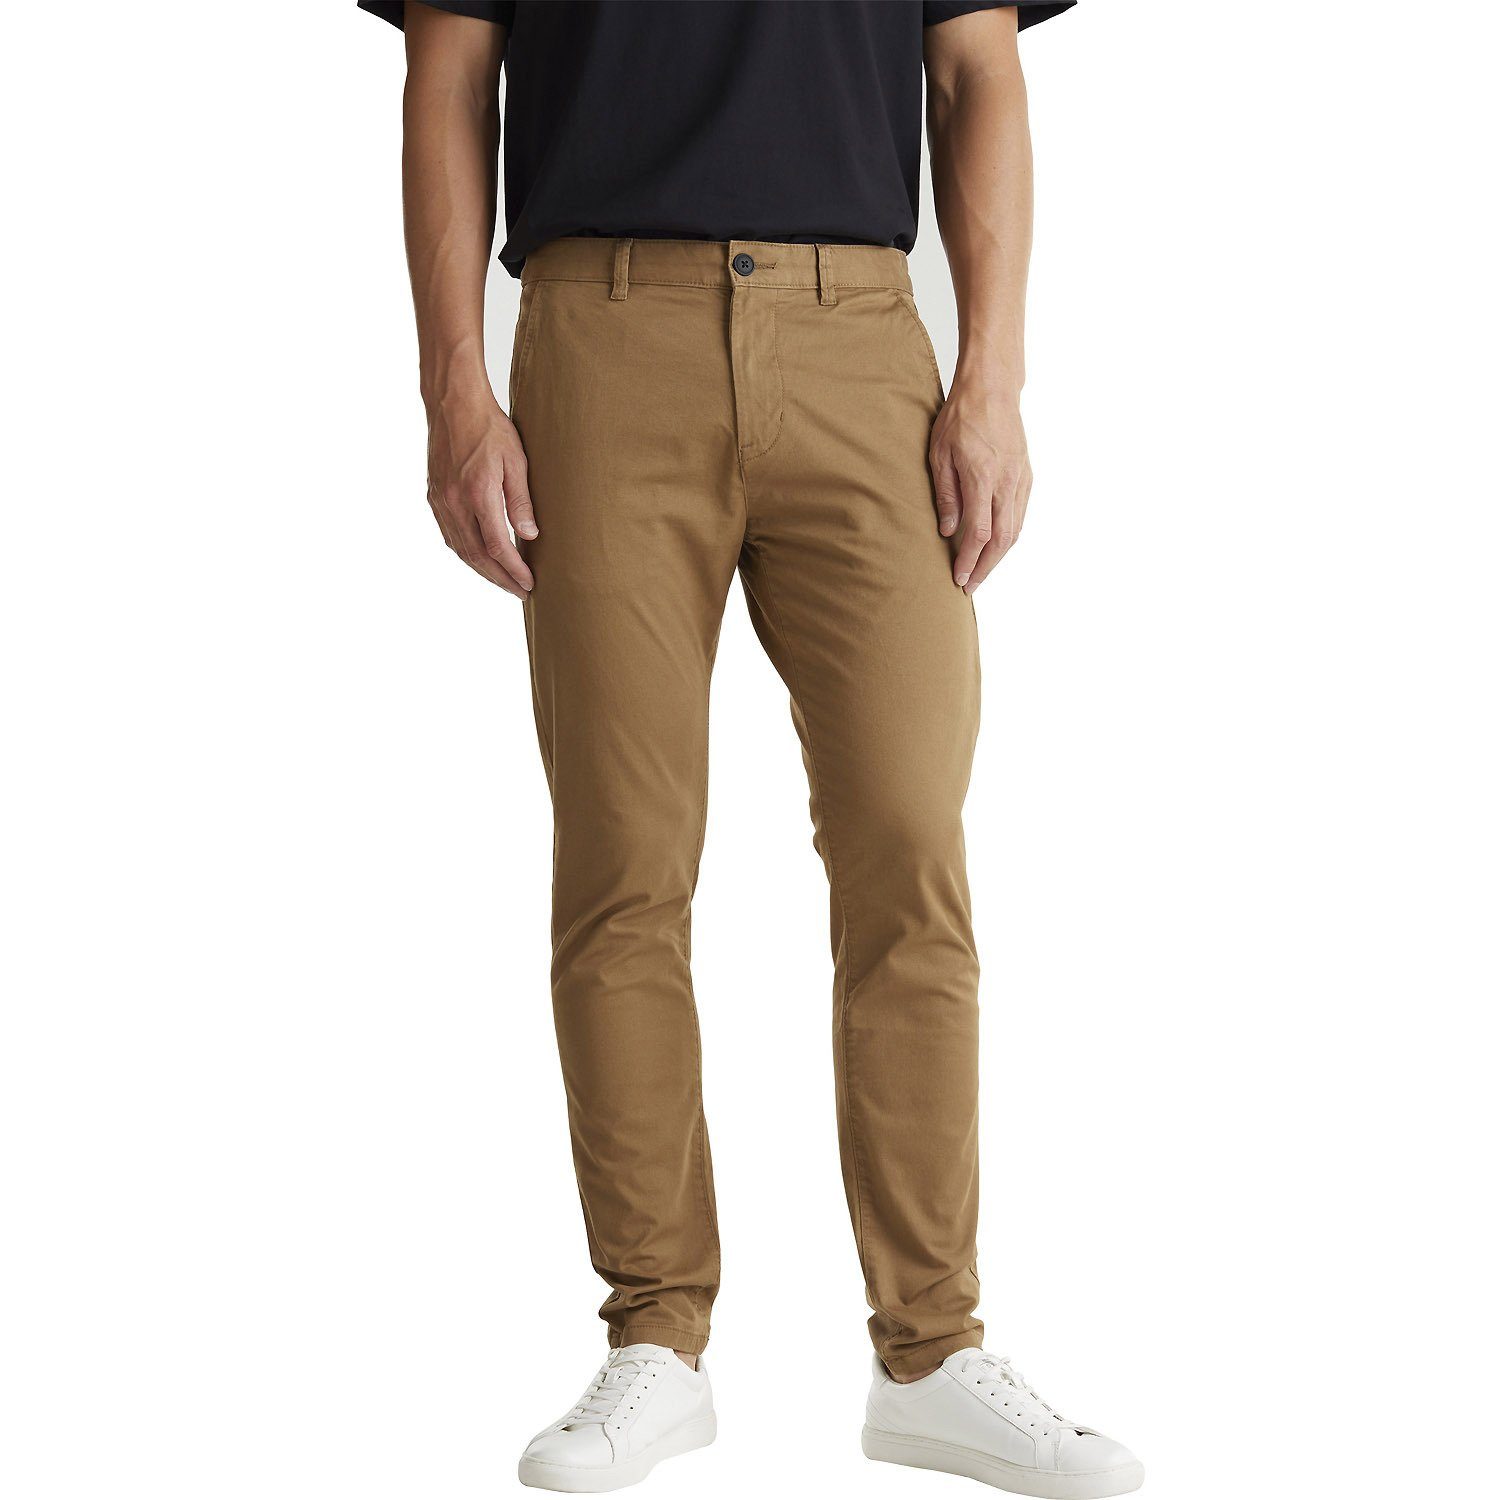 Esprit Chinostyle edc Outdoorhose Hose by